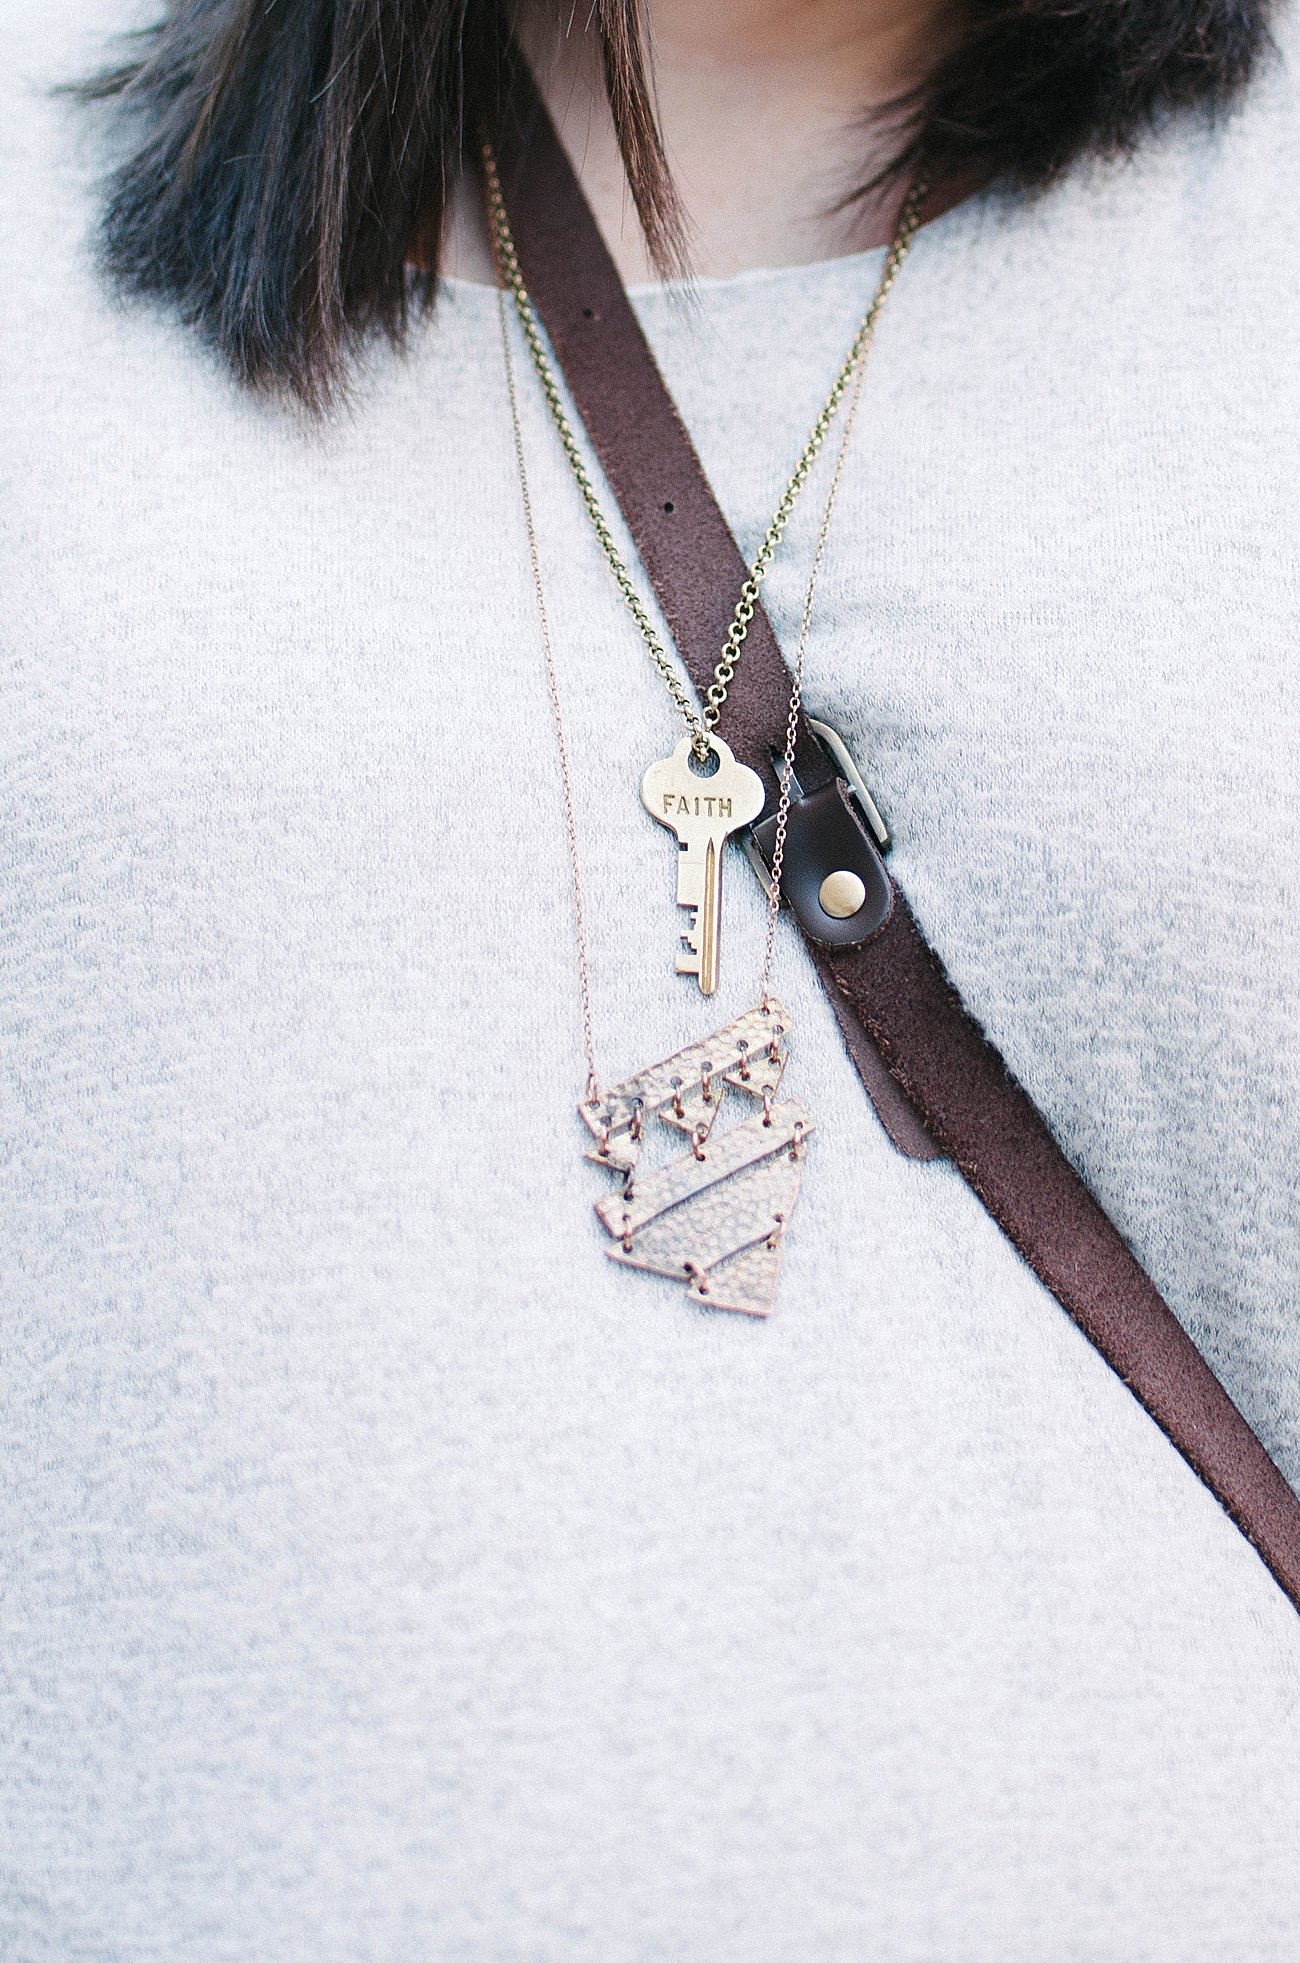 The Flourish Market / Mata Traders necklace and The Giving Keys necklace